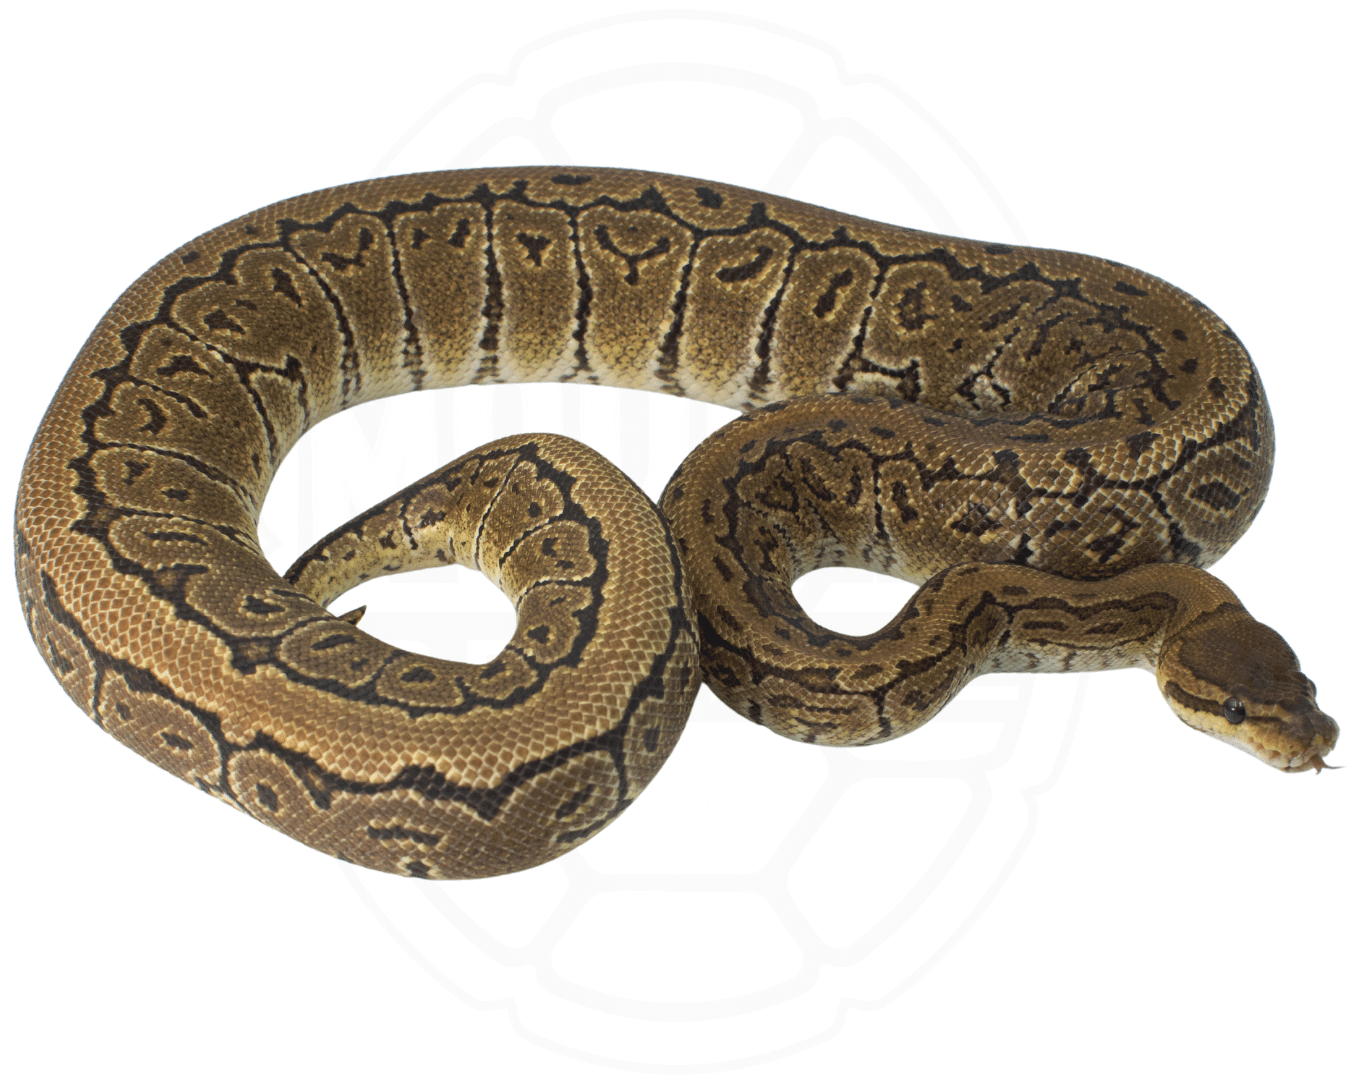 pinstripe het clown ball python for sale online at cheap prices, buy ball pythons near me